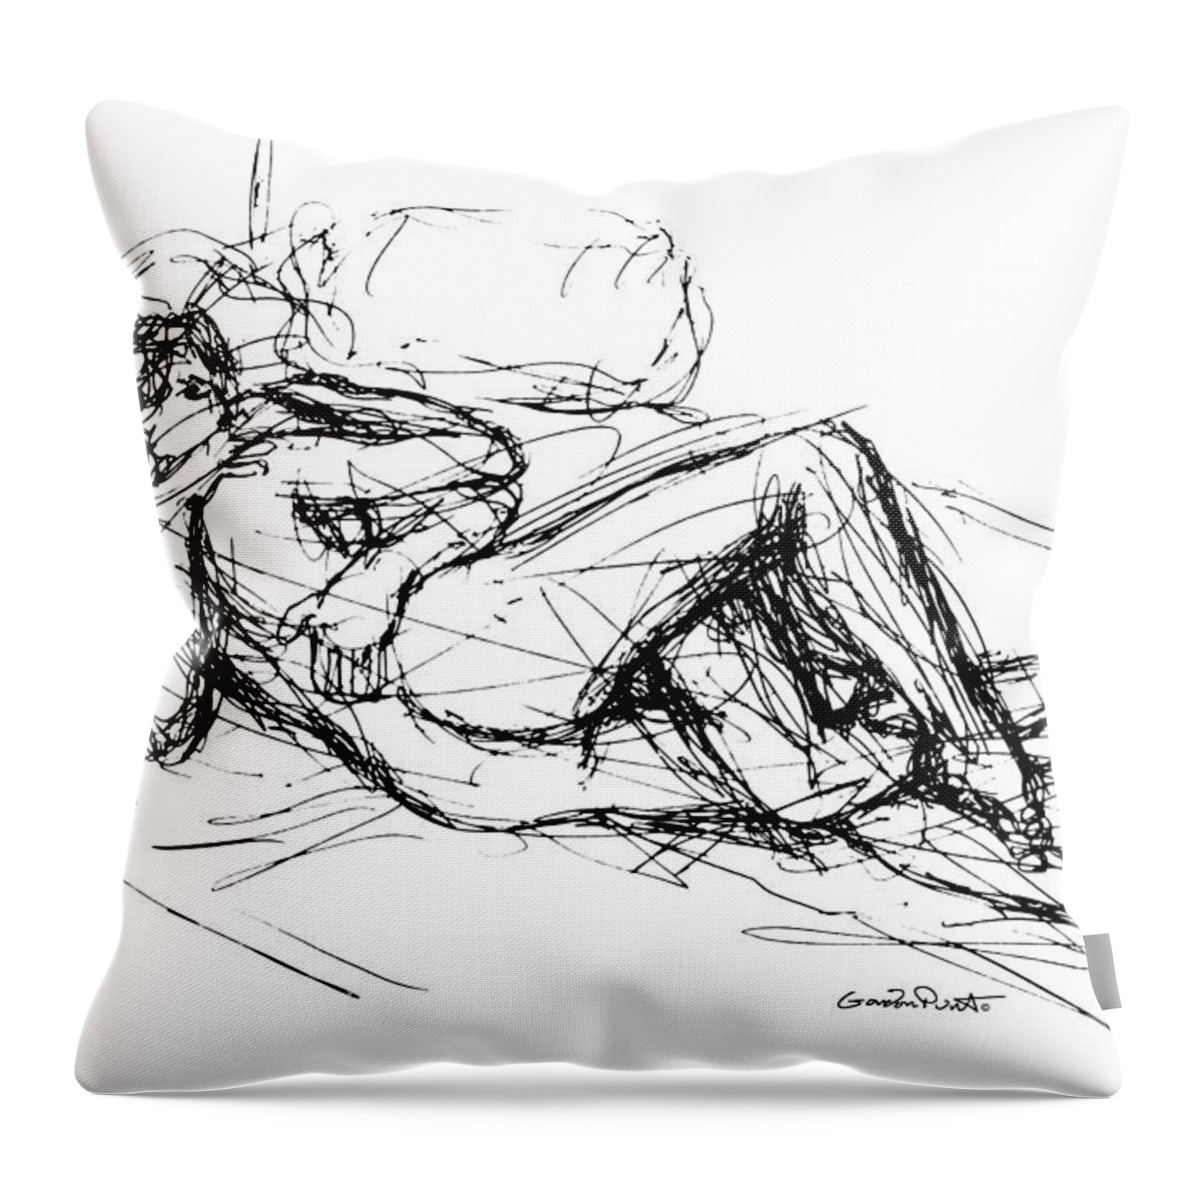 Couples Throw Pillow featuring the drawing Erotic Couple Sketches 8 by Gordon Punt